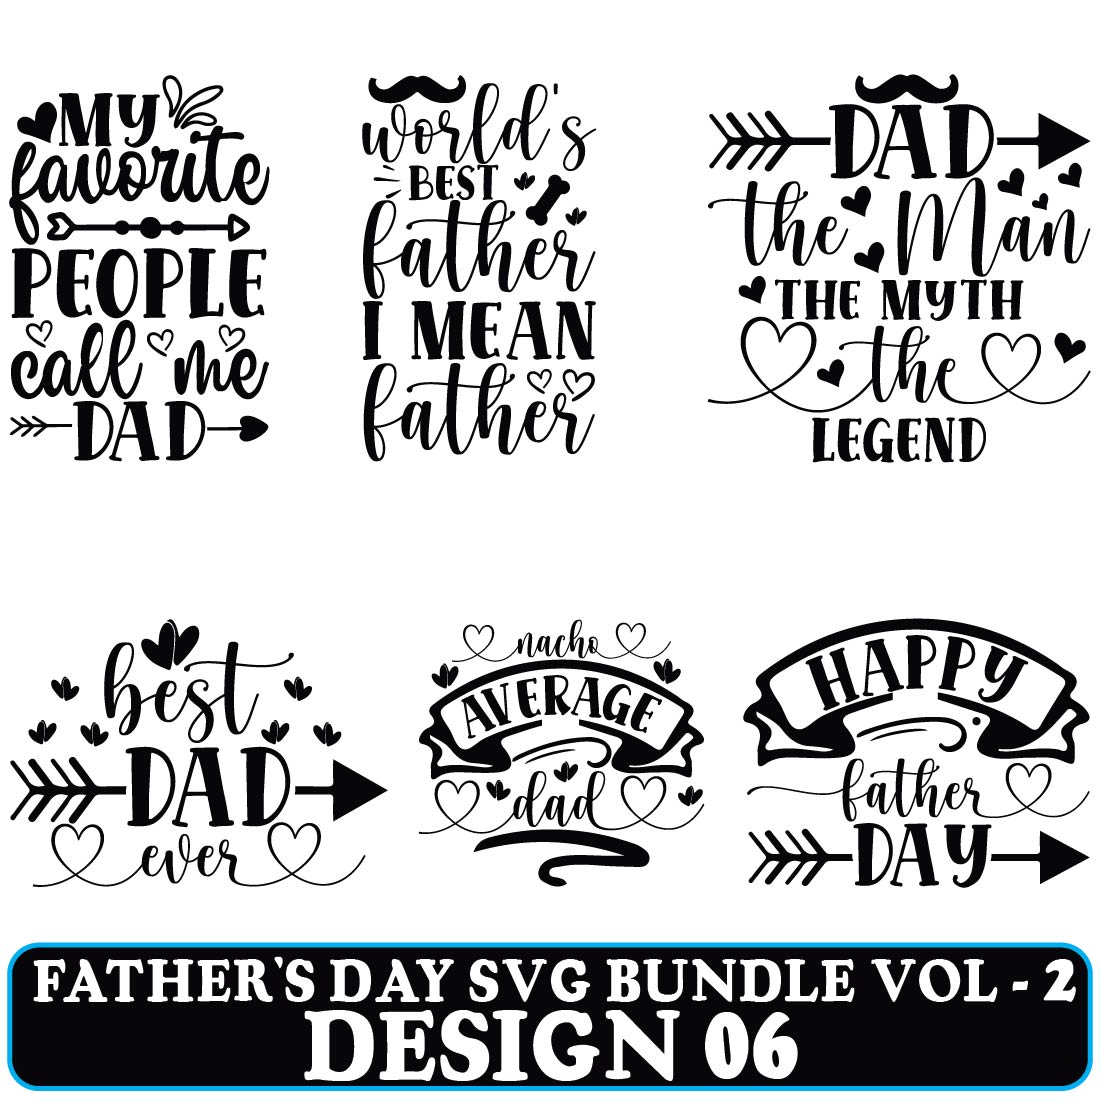 Father's Day SVG Bundle Vol - 2 preview image.